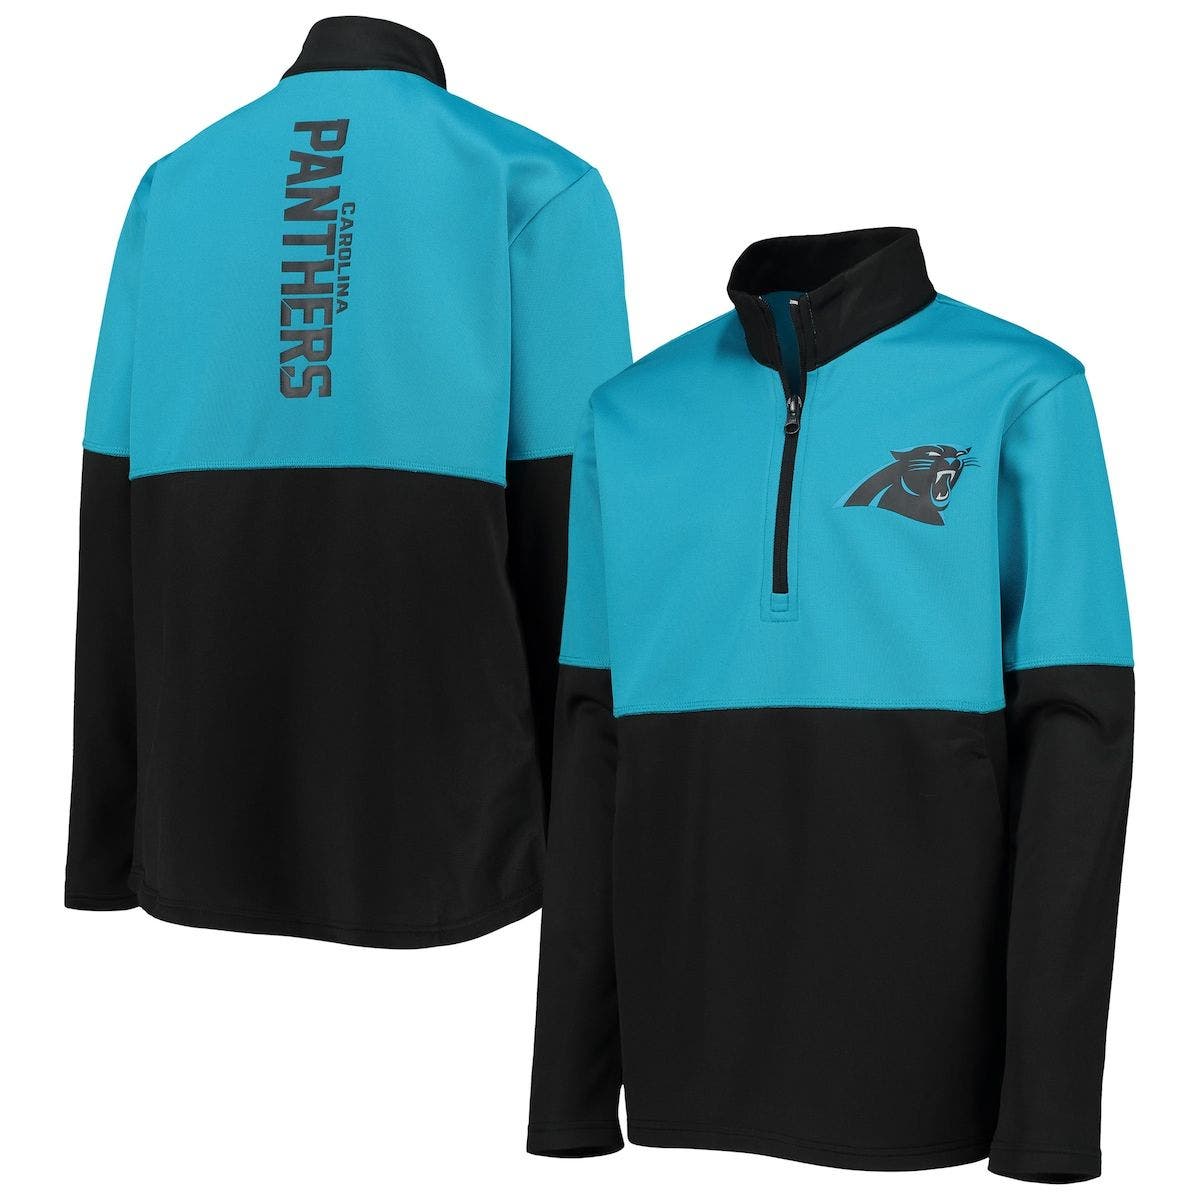 Outerstuff NCAA Mens Sideline Squad ID Jacket